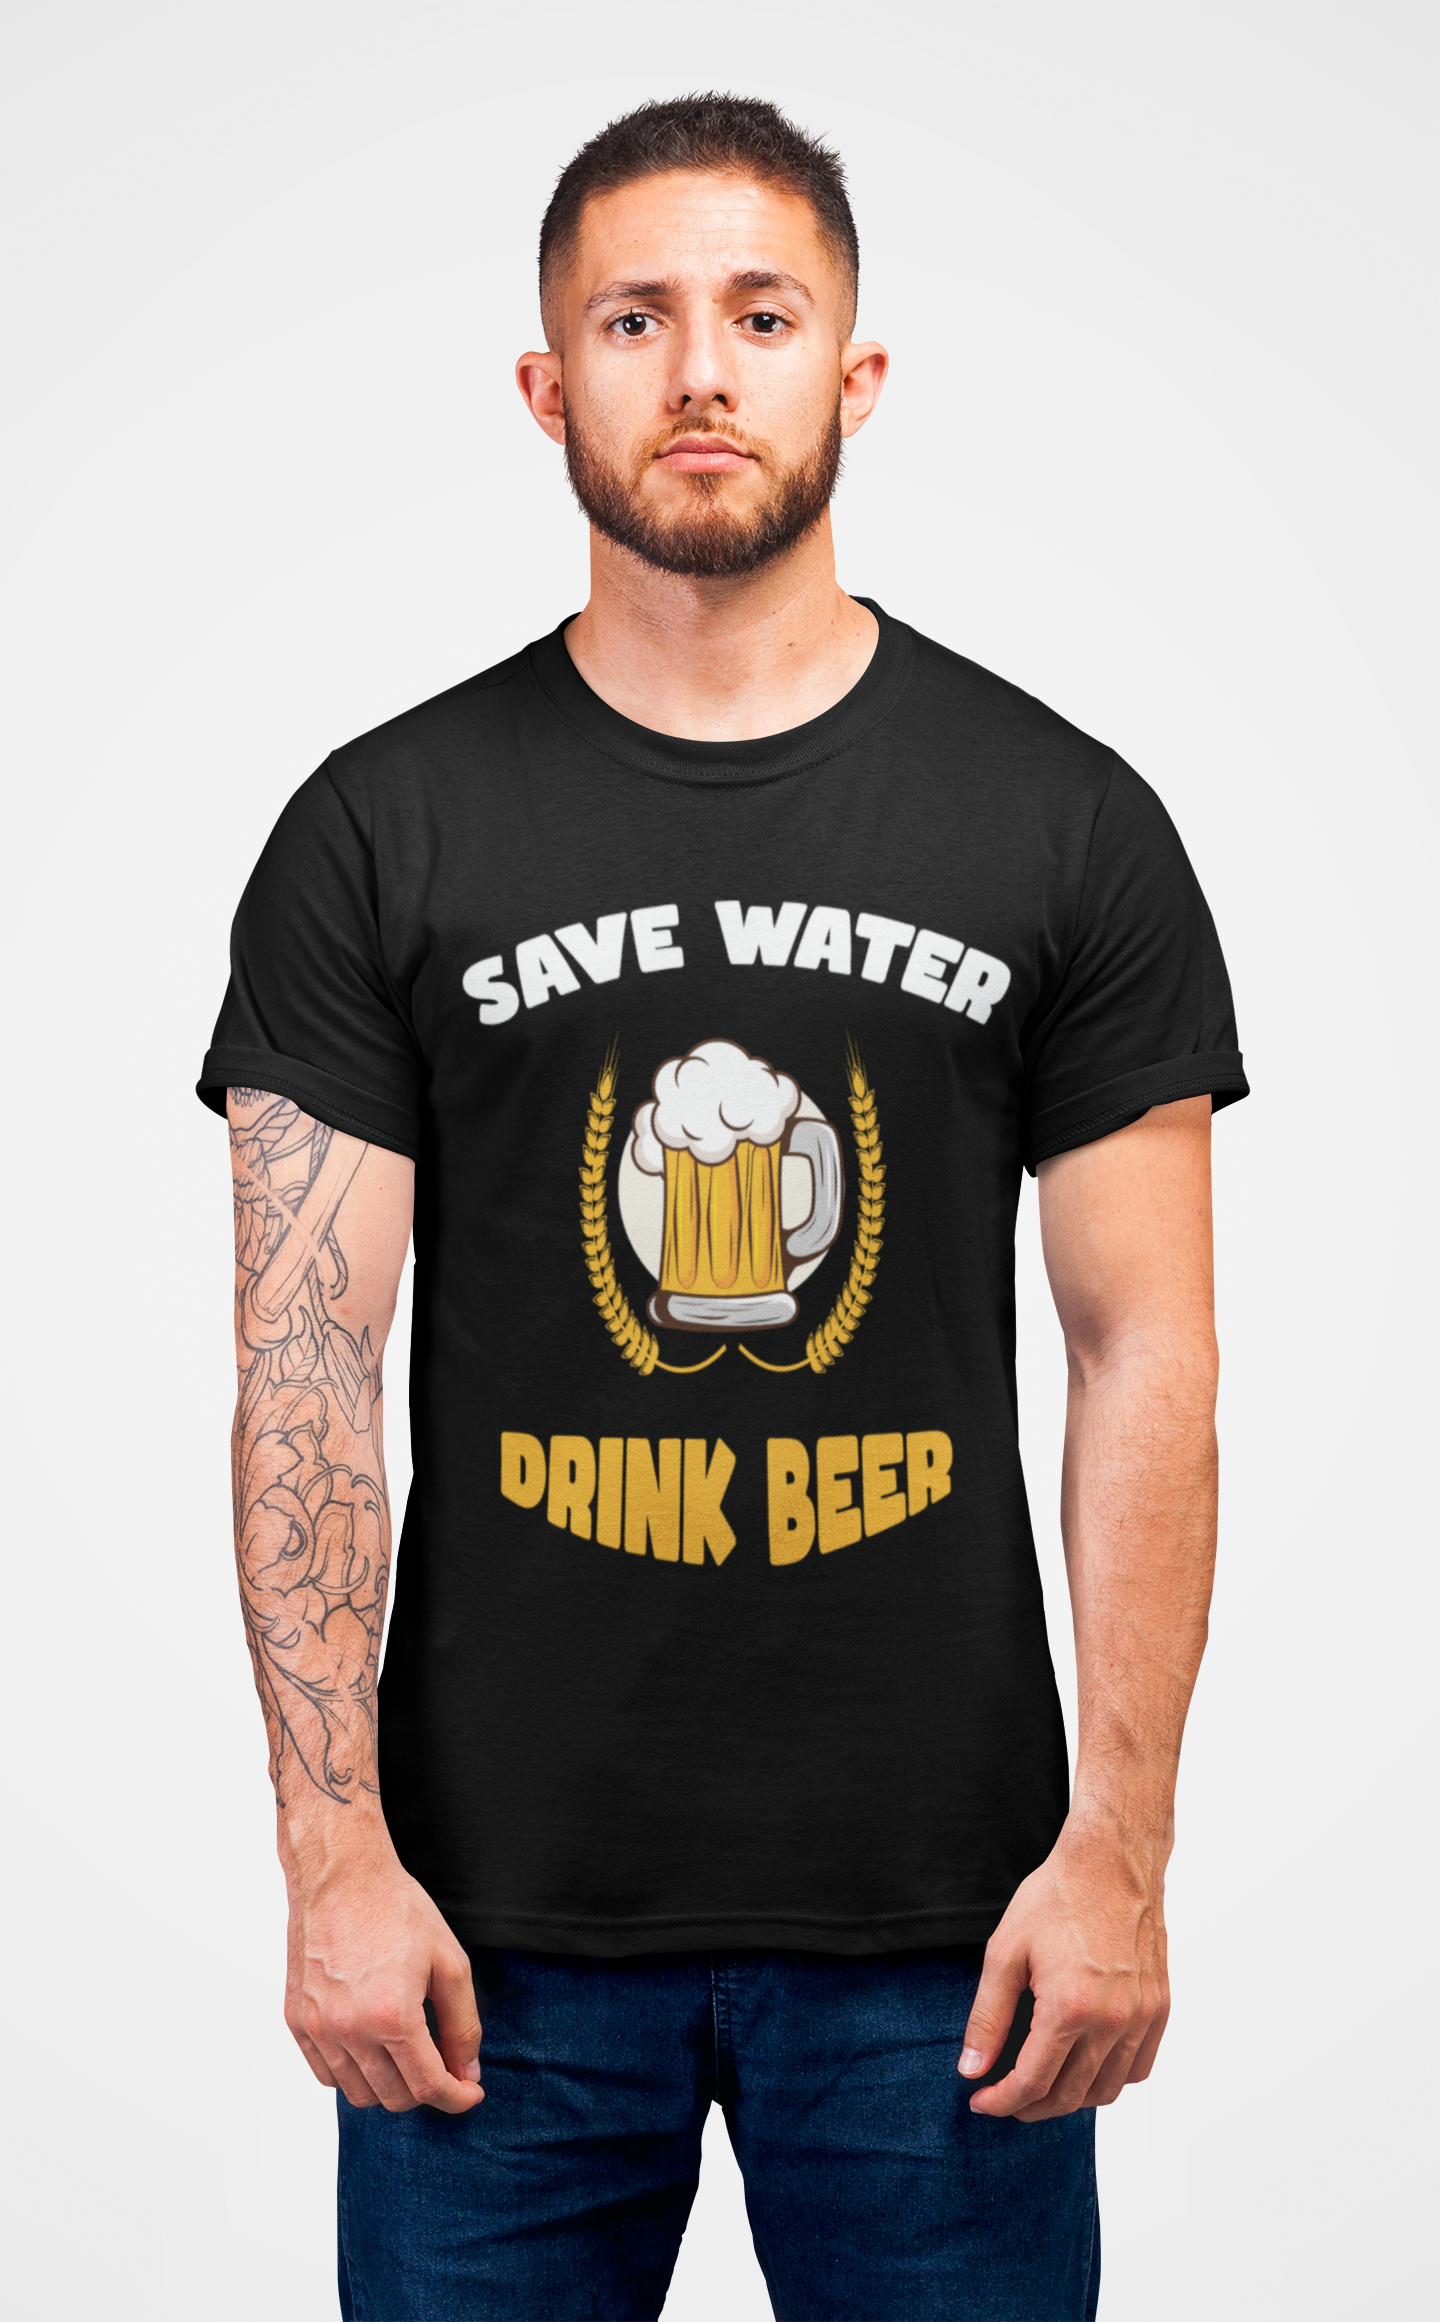 "Save water drink BEER" T-Shirt